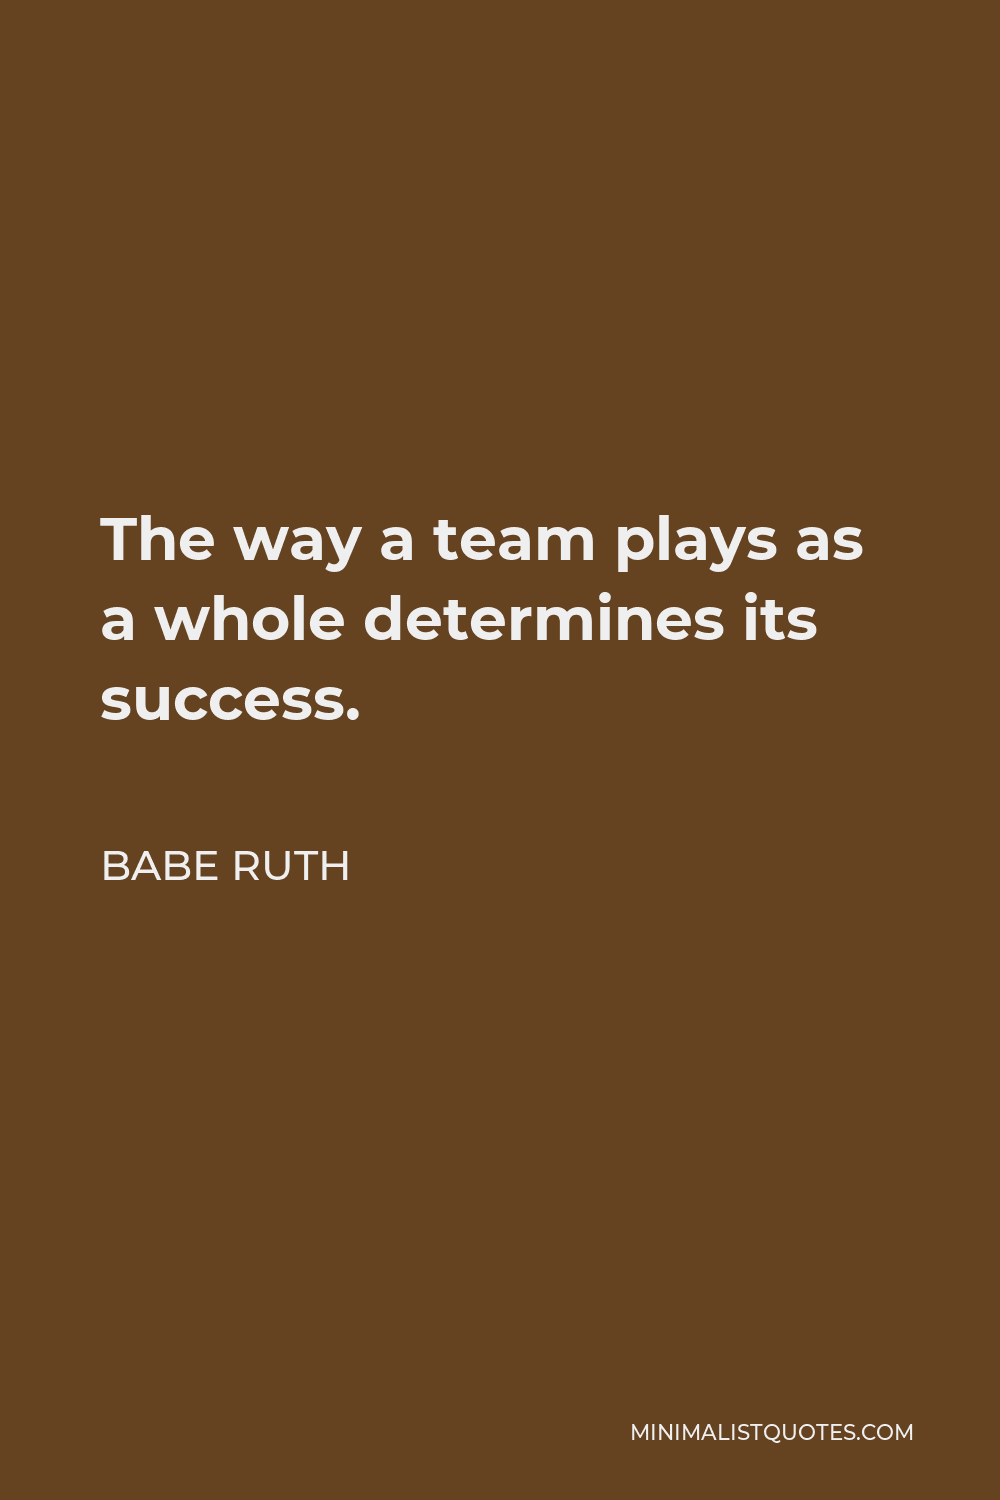 Babe Ruth Quote - The way a team plays as a whole determines its success. You may have the greatest bunch of individual stars in the world, but if they don’t play together, the club won’t be worth a dime.